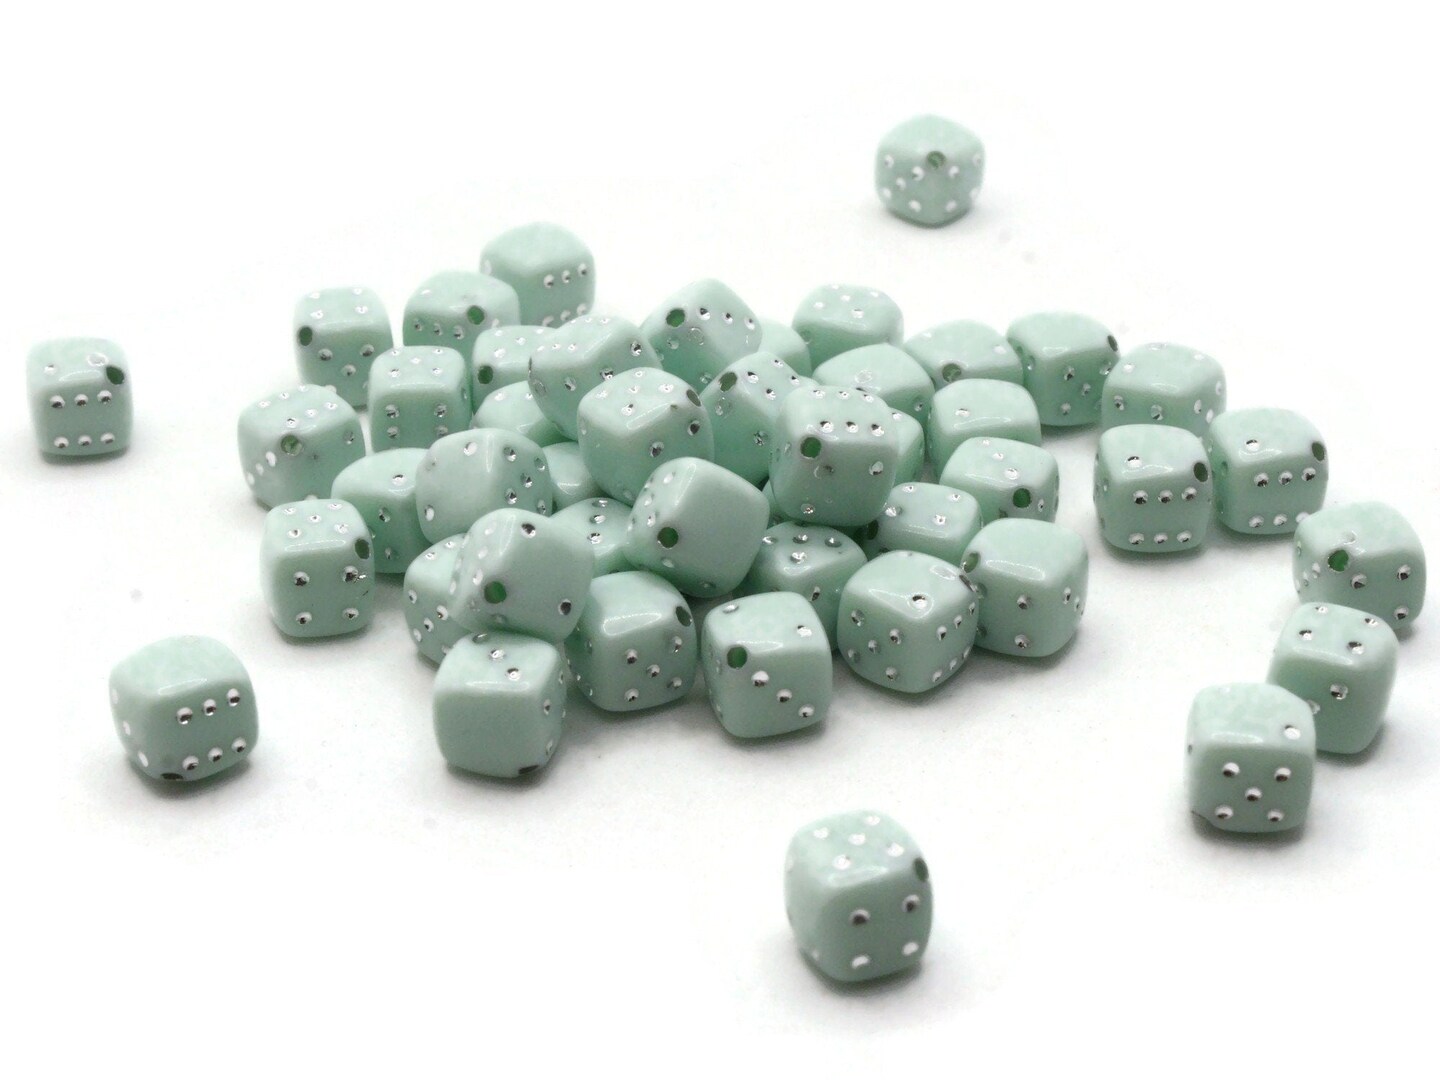 50 8mm Green Dice Beads - Acrylic Cube Beads by Smileyboy Beads | Michaels